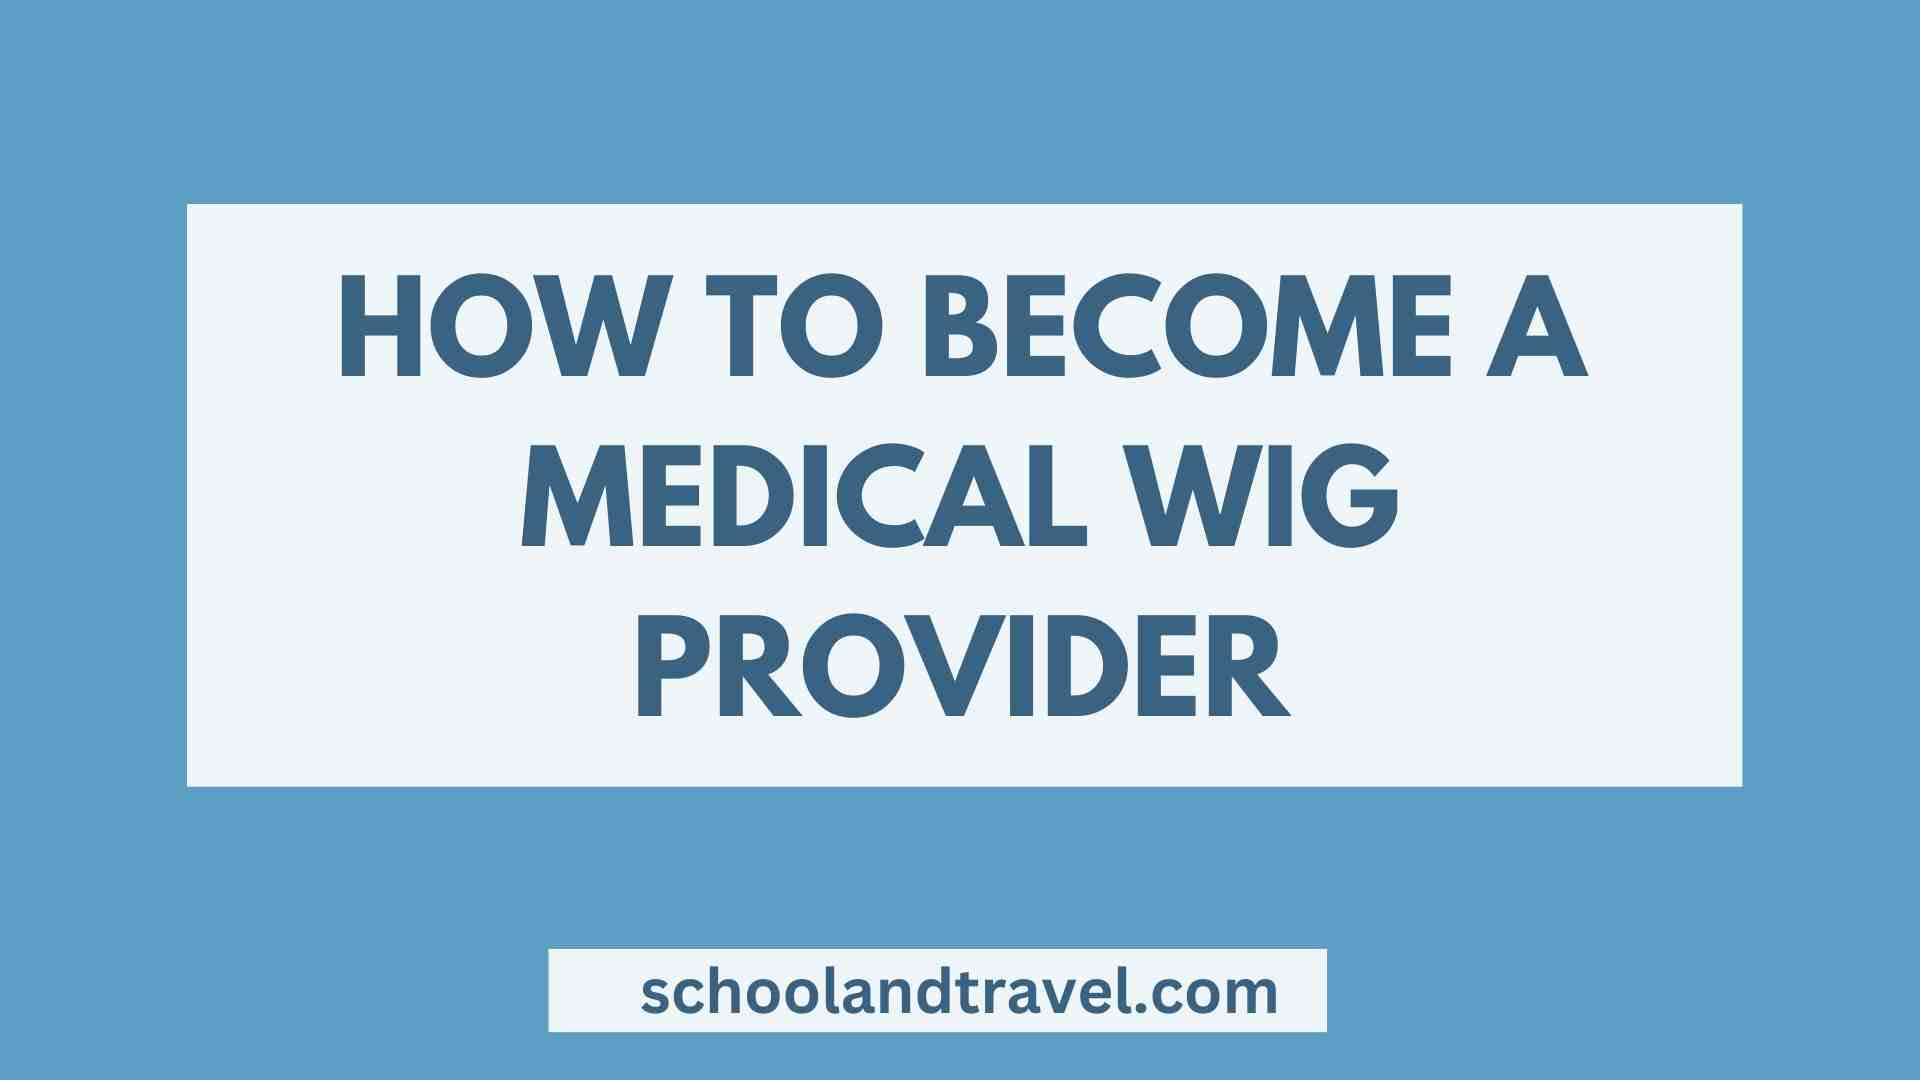 How to Become a Medical Wig Provider